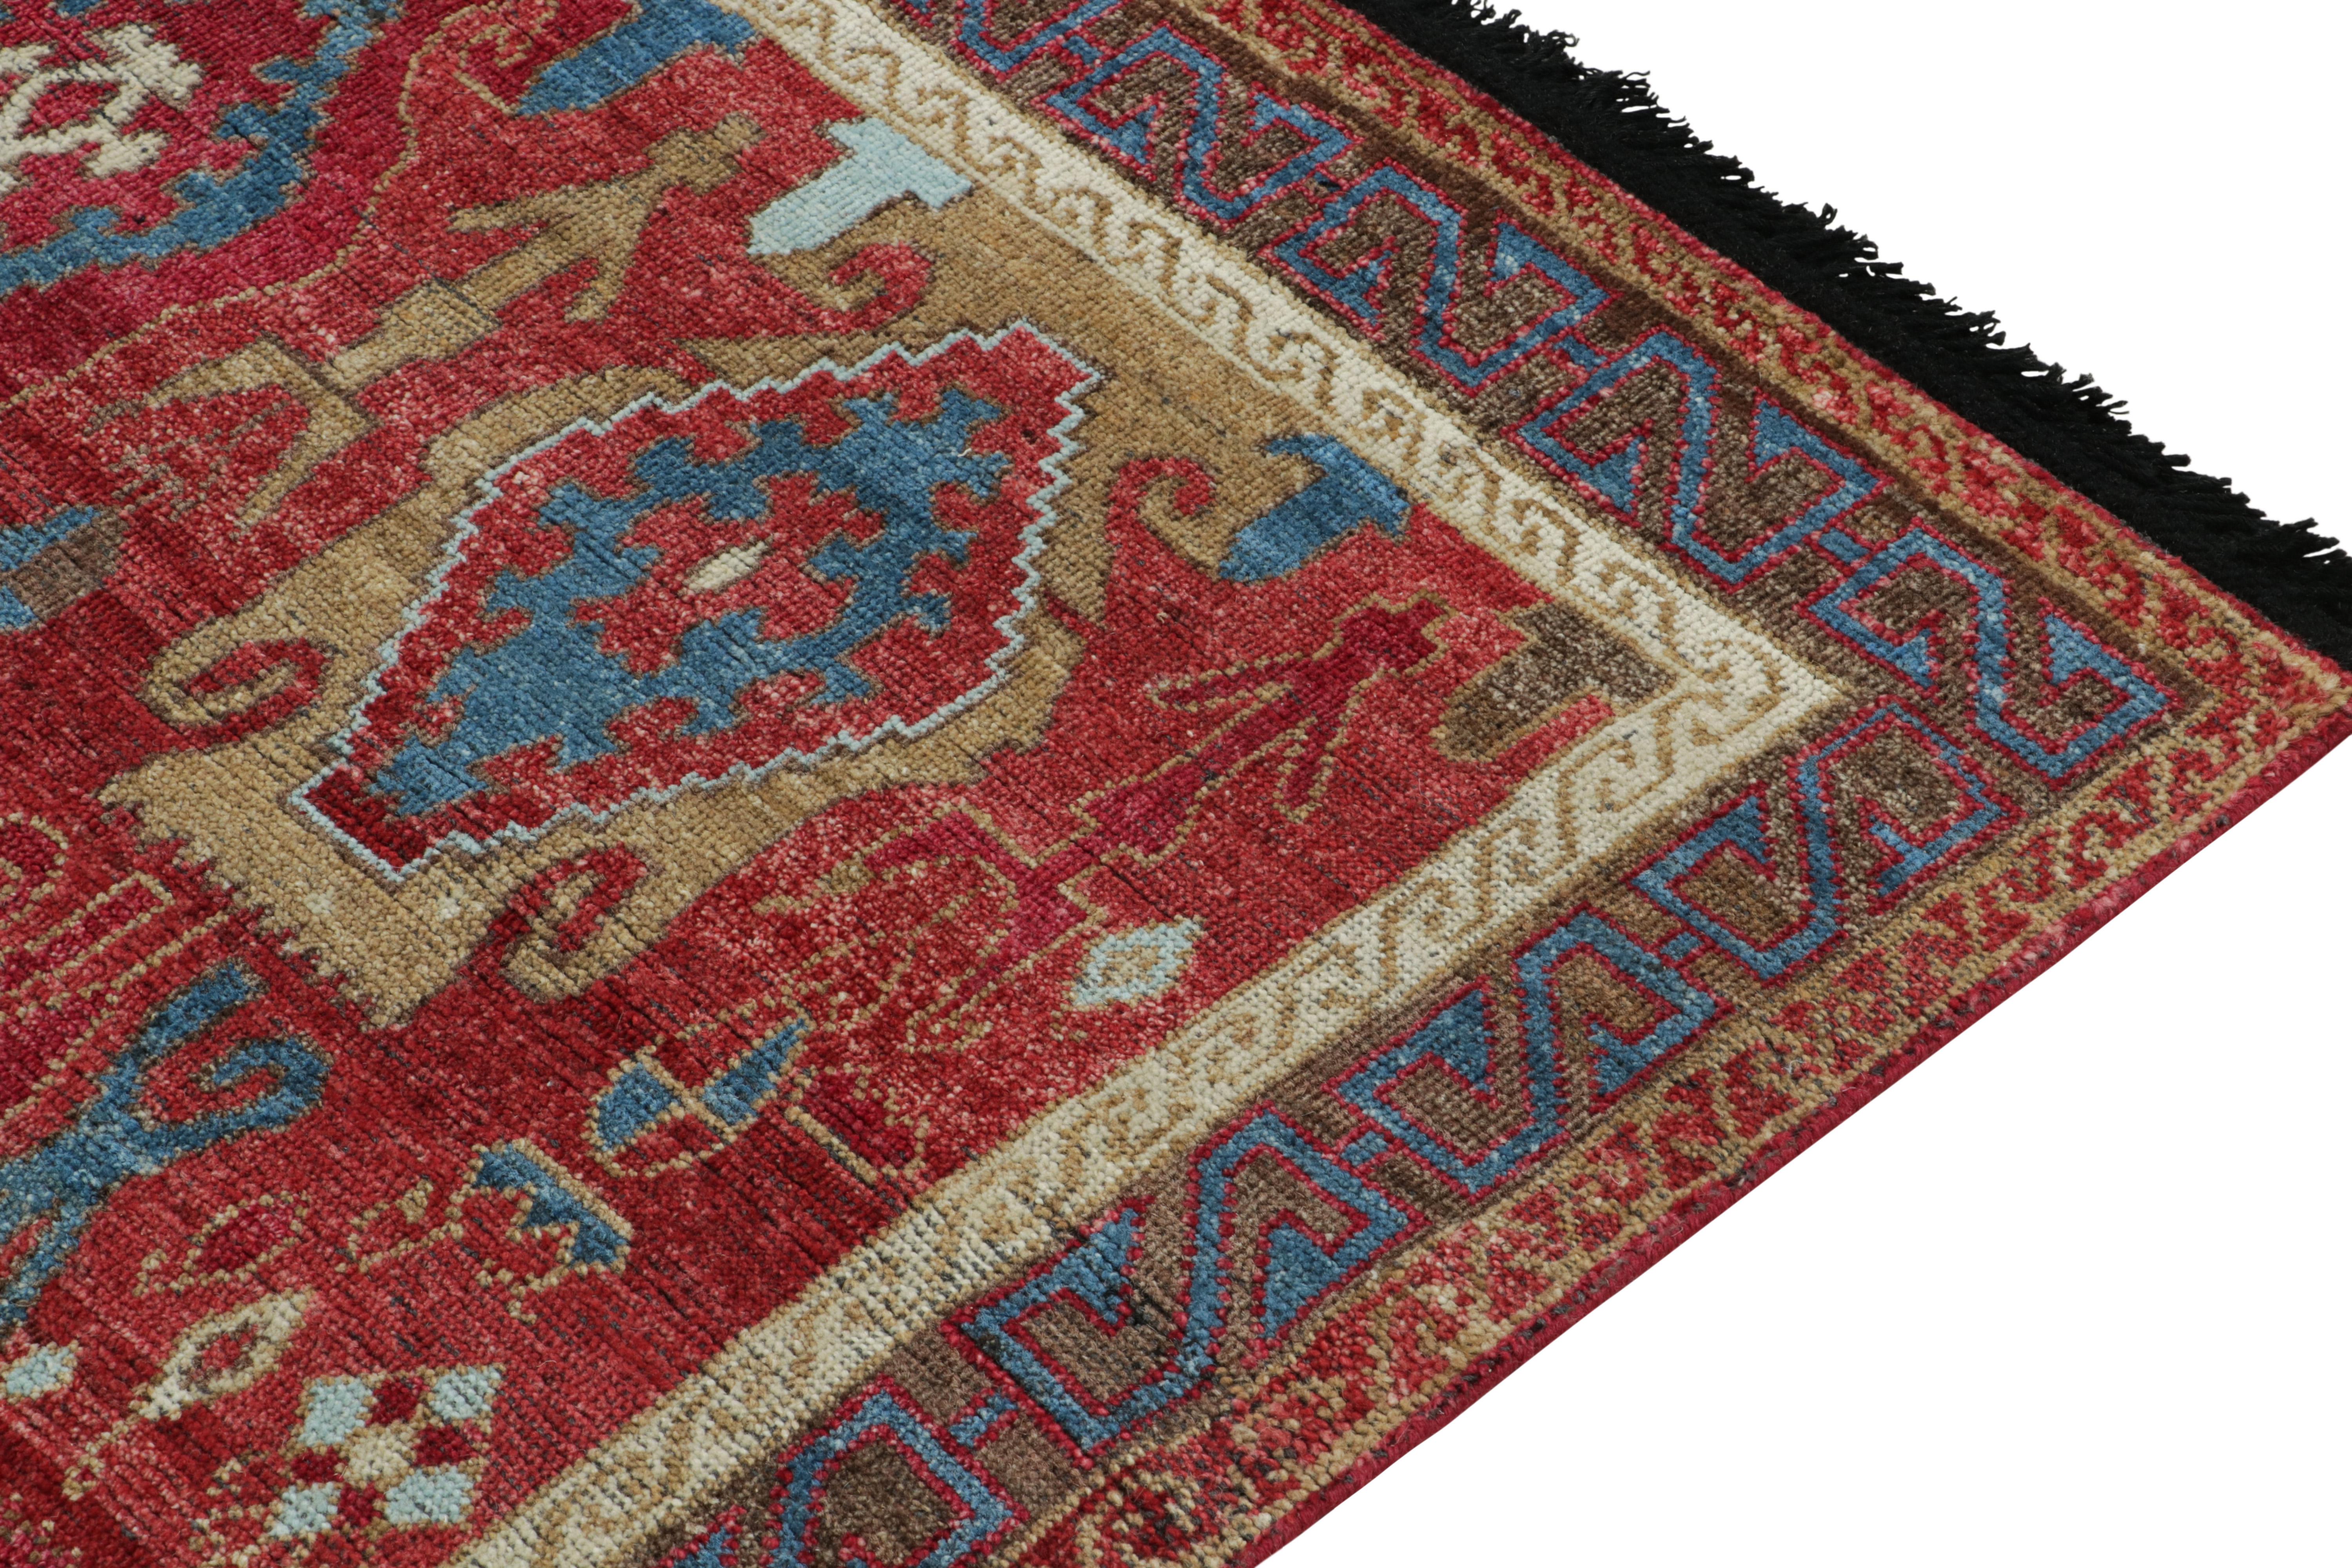 Rug & Kilim's Tribal Style Rug in Red, Blue and Brown Geometric Pattern In New Condition For Sale In Long Island City, NY